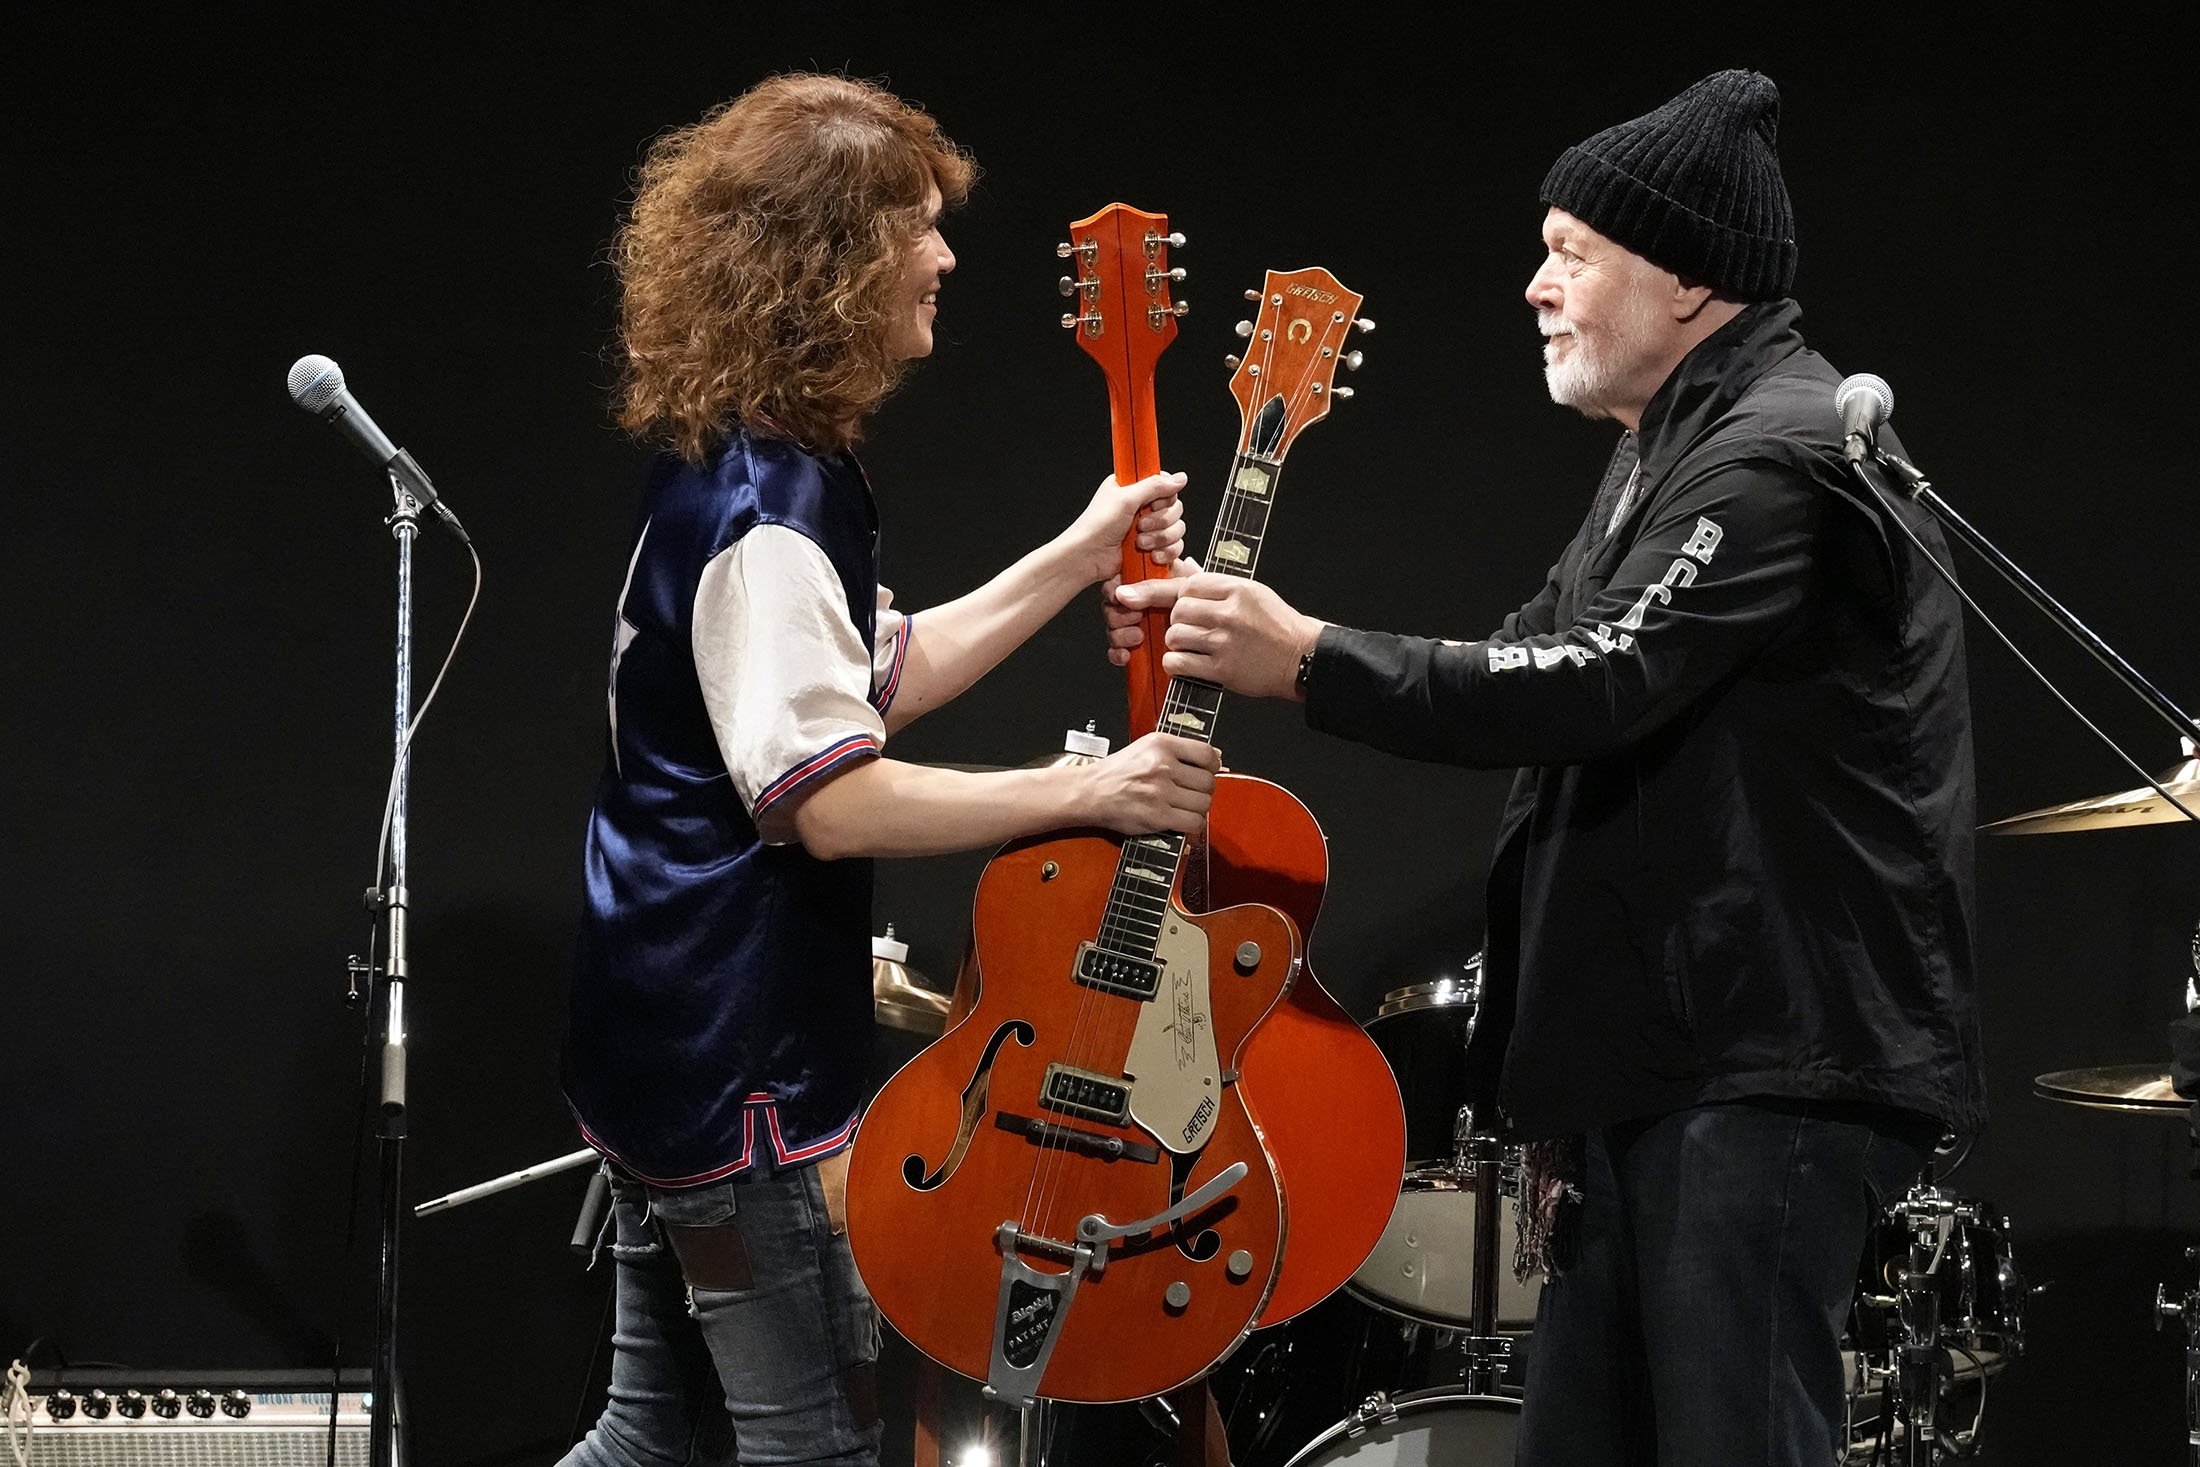 Canadian rock legend Randy Bachman (R), receives his stolen Gretsch guitar during the Lost and Found Guitar Exchange Ceremony, at Canadian Embassy in Tokyo, Japan, July 1, 2022. (AP Photo)